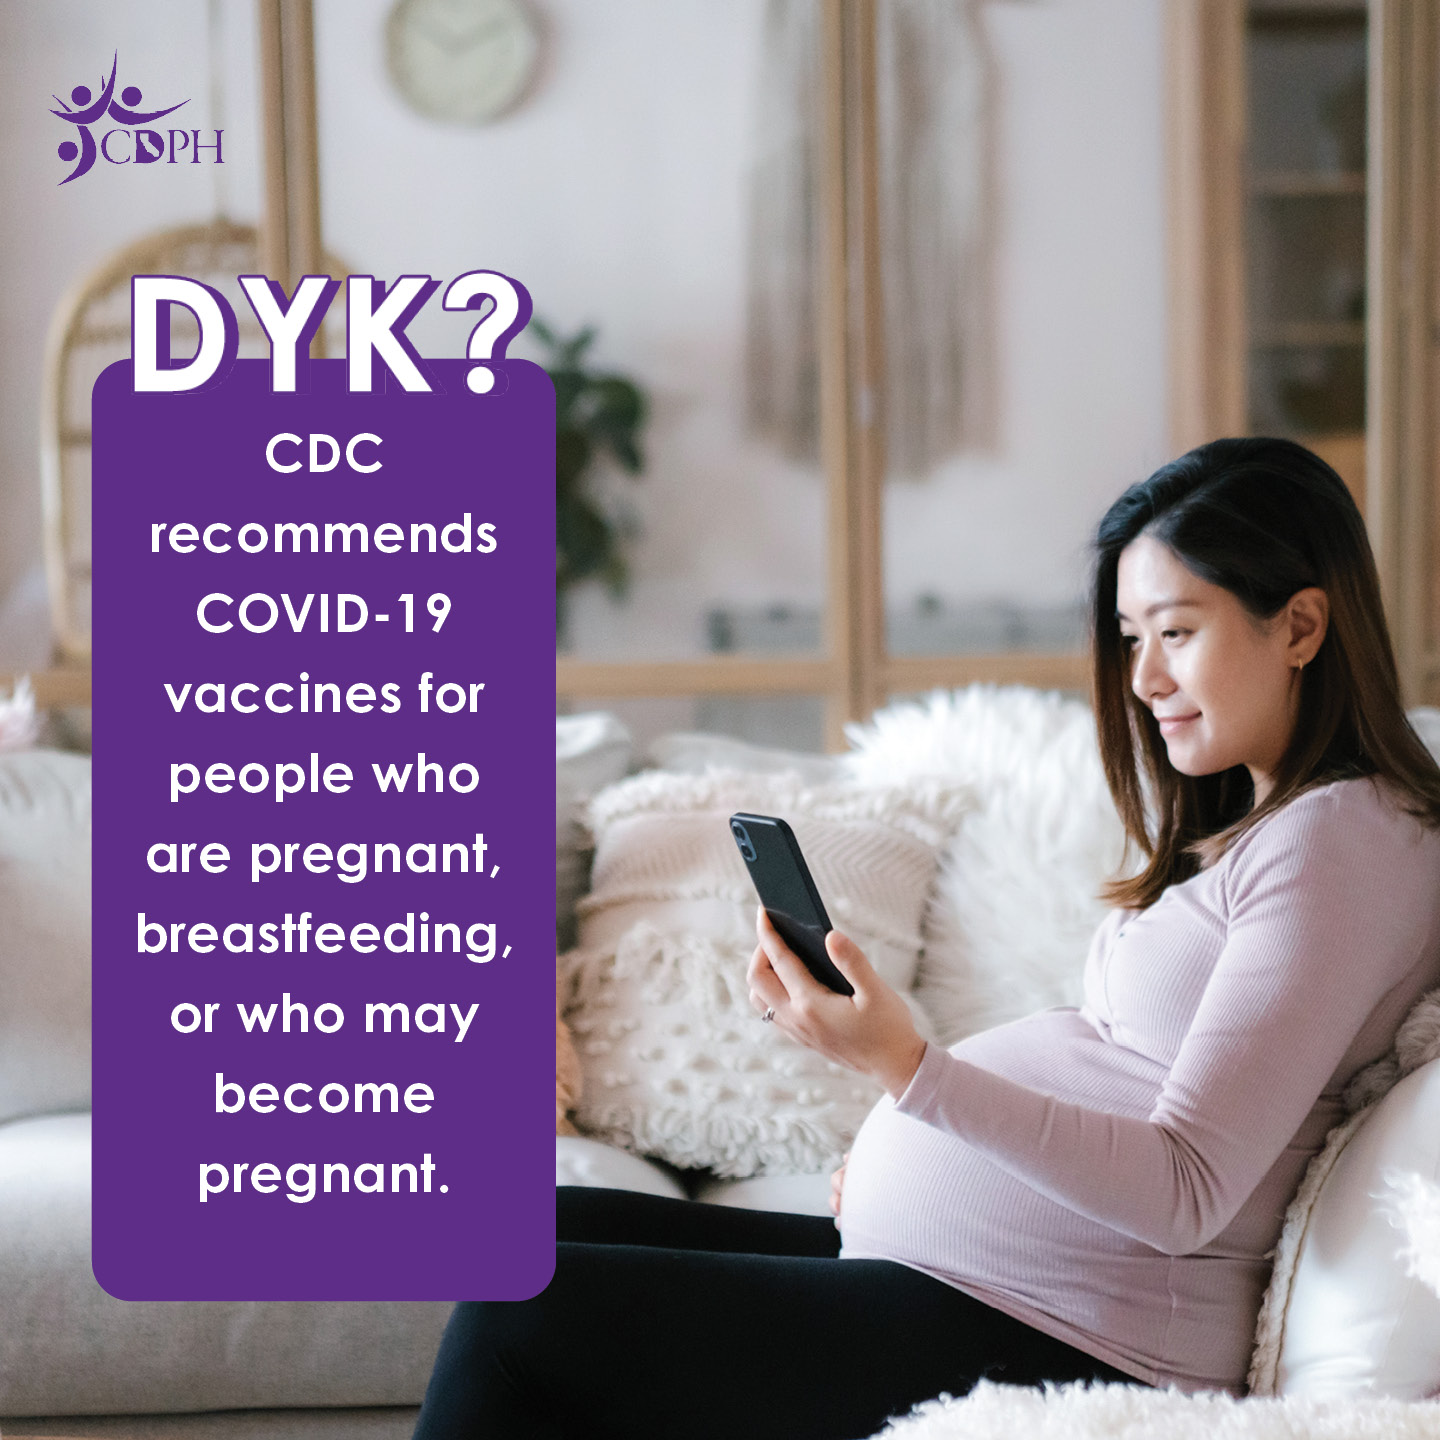 CDC recommends COVID-19 vaccines for people who are pregnant, breatfeeding, or who may become pregnant